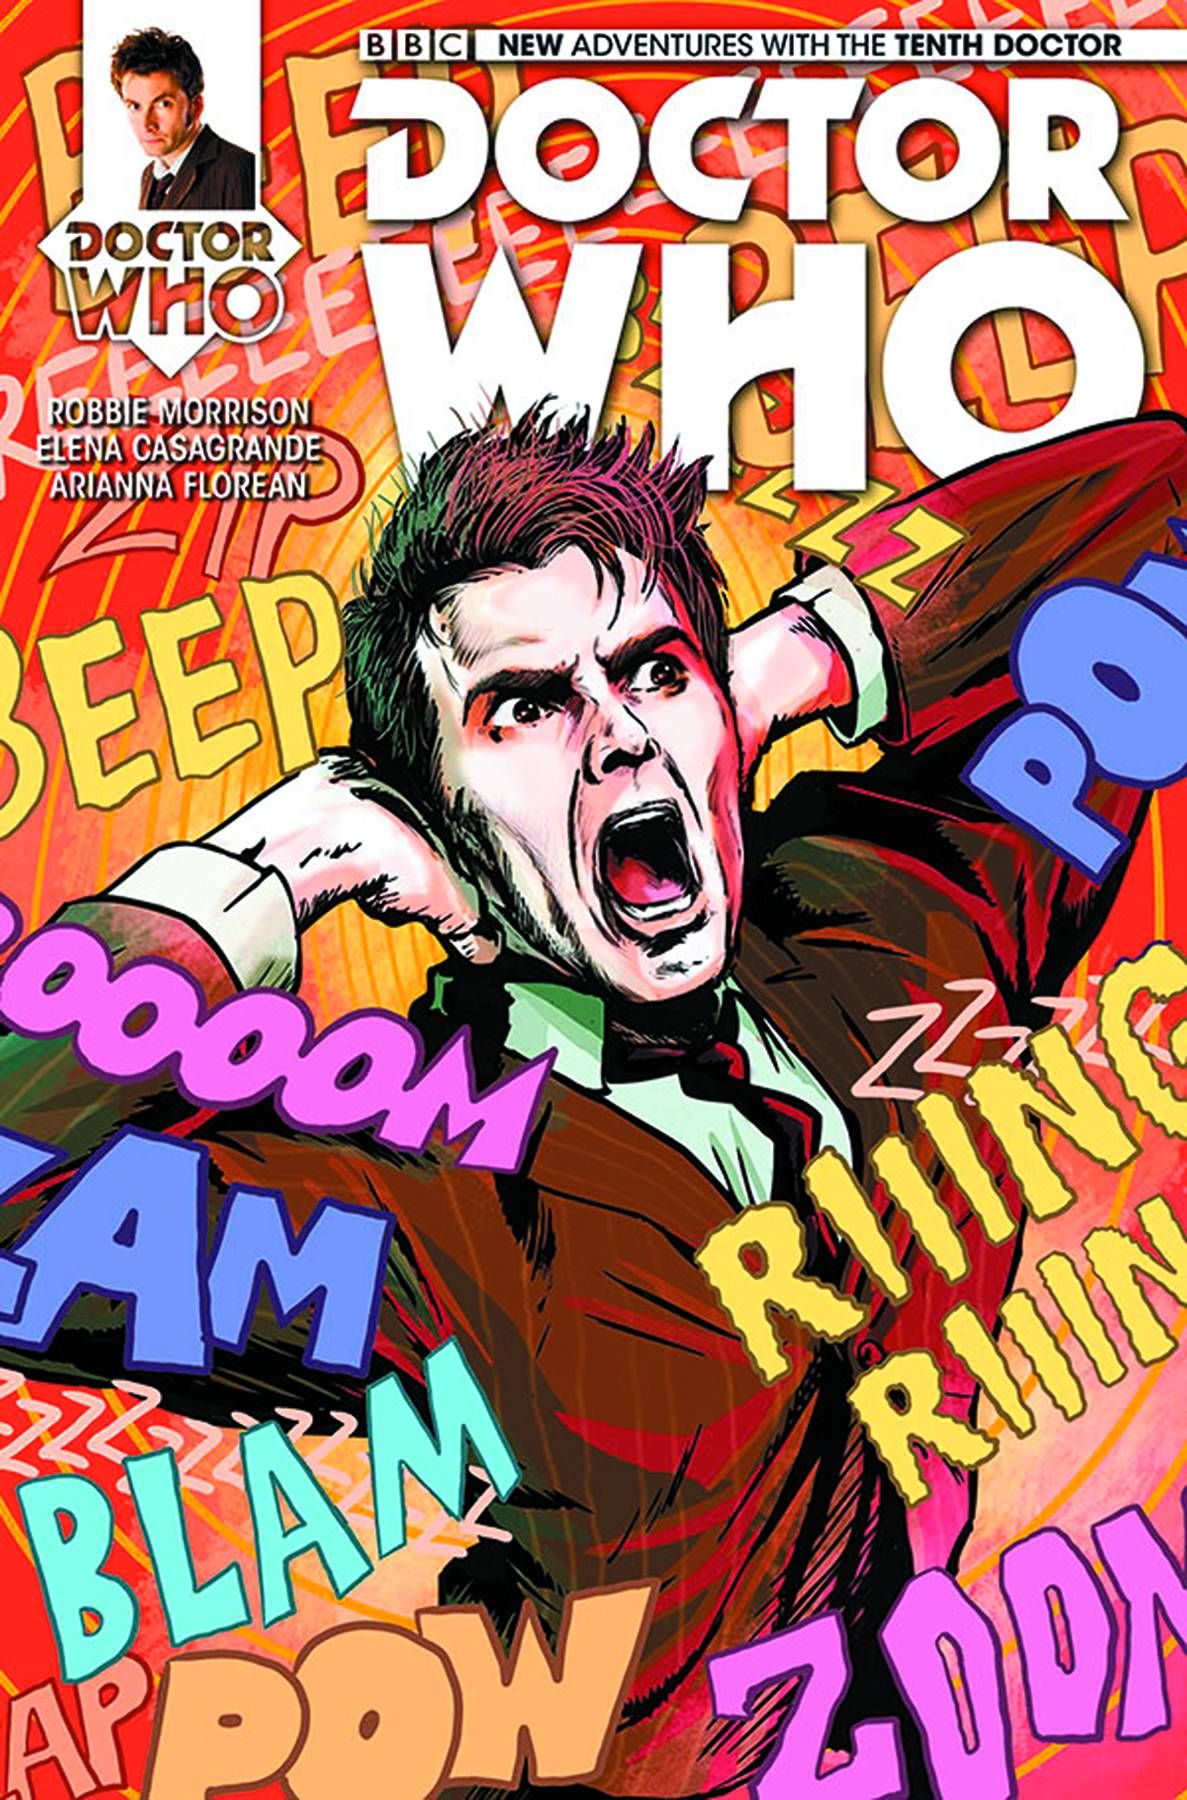 Doctor Who: The Tenth Doctor #10 Comic